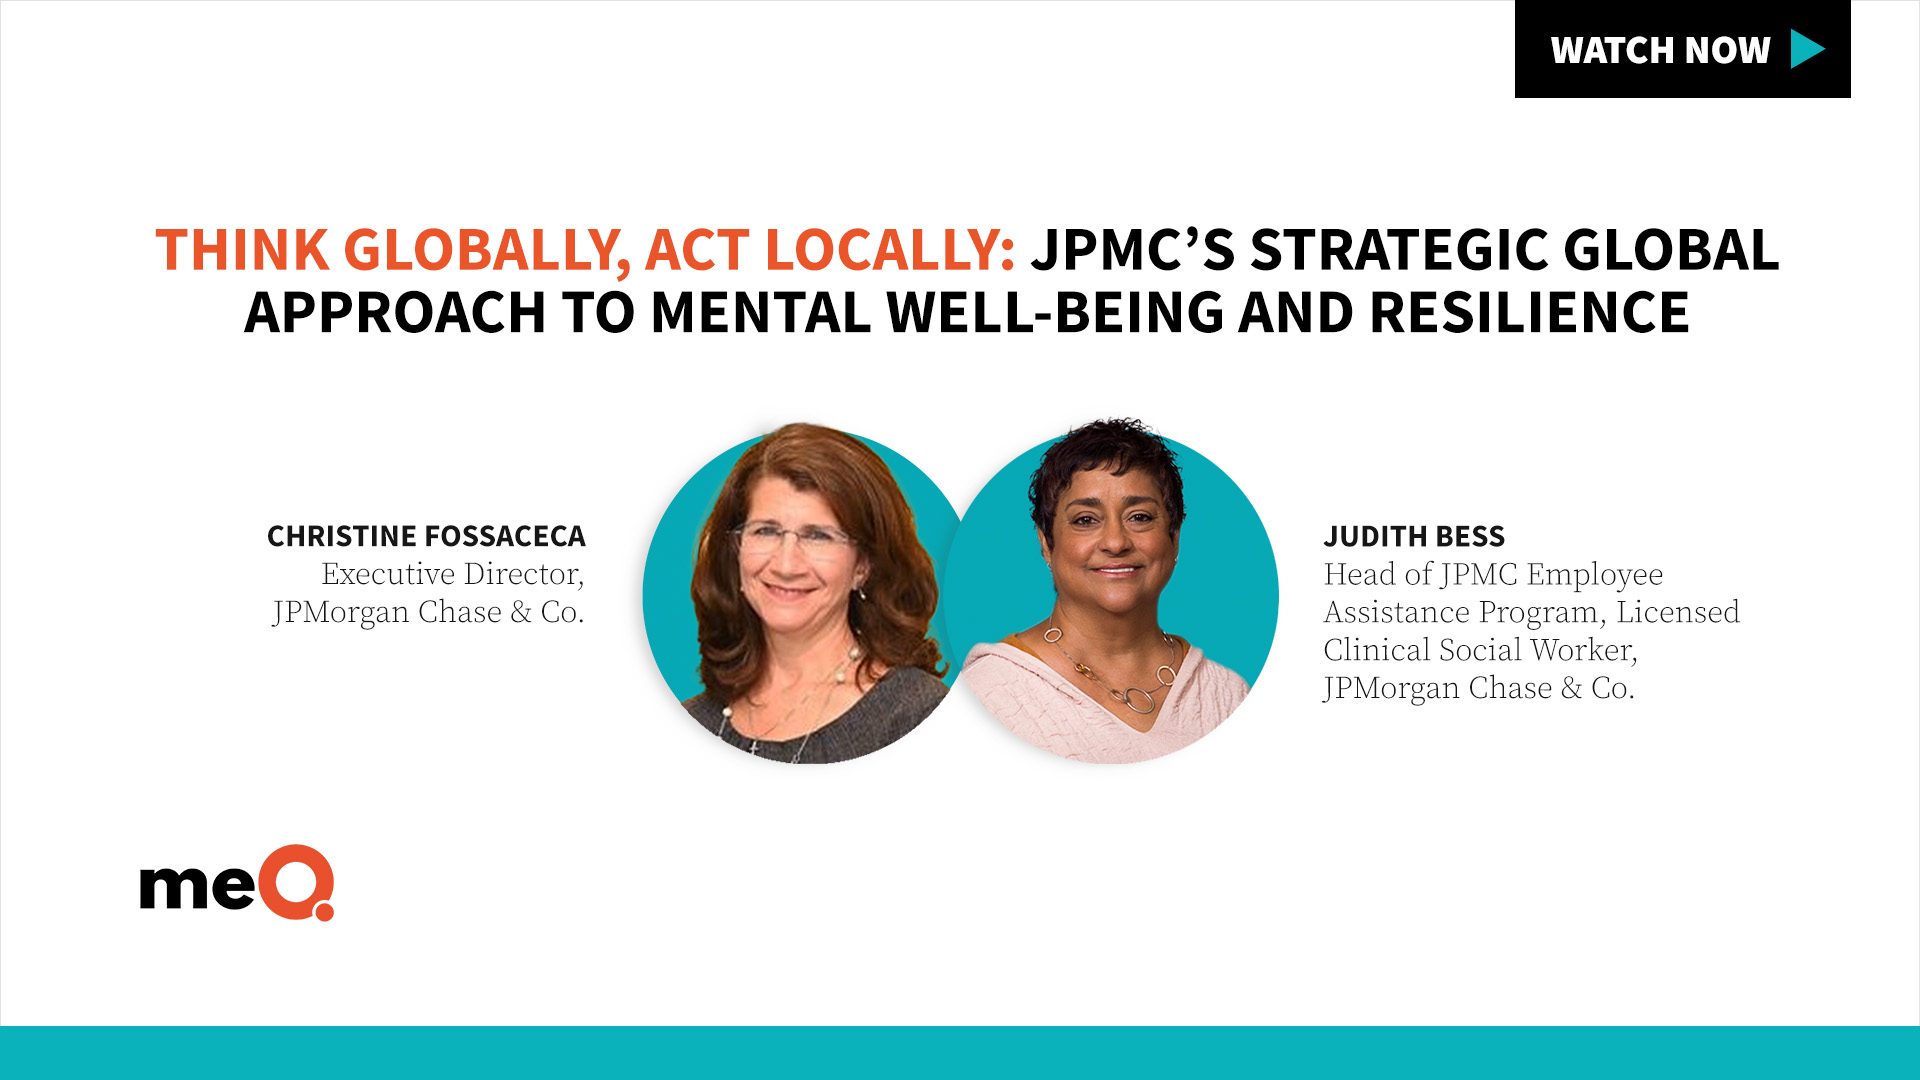 JPMC’s Strategic Global Approach to Mental Well-being